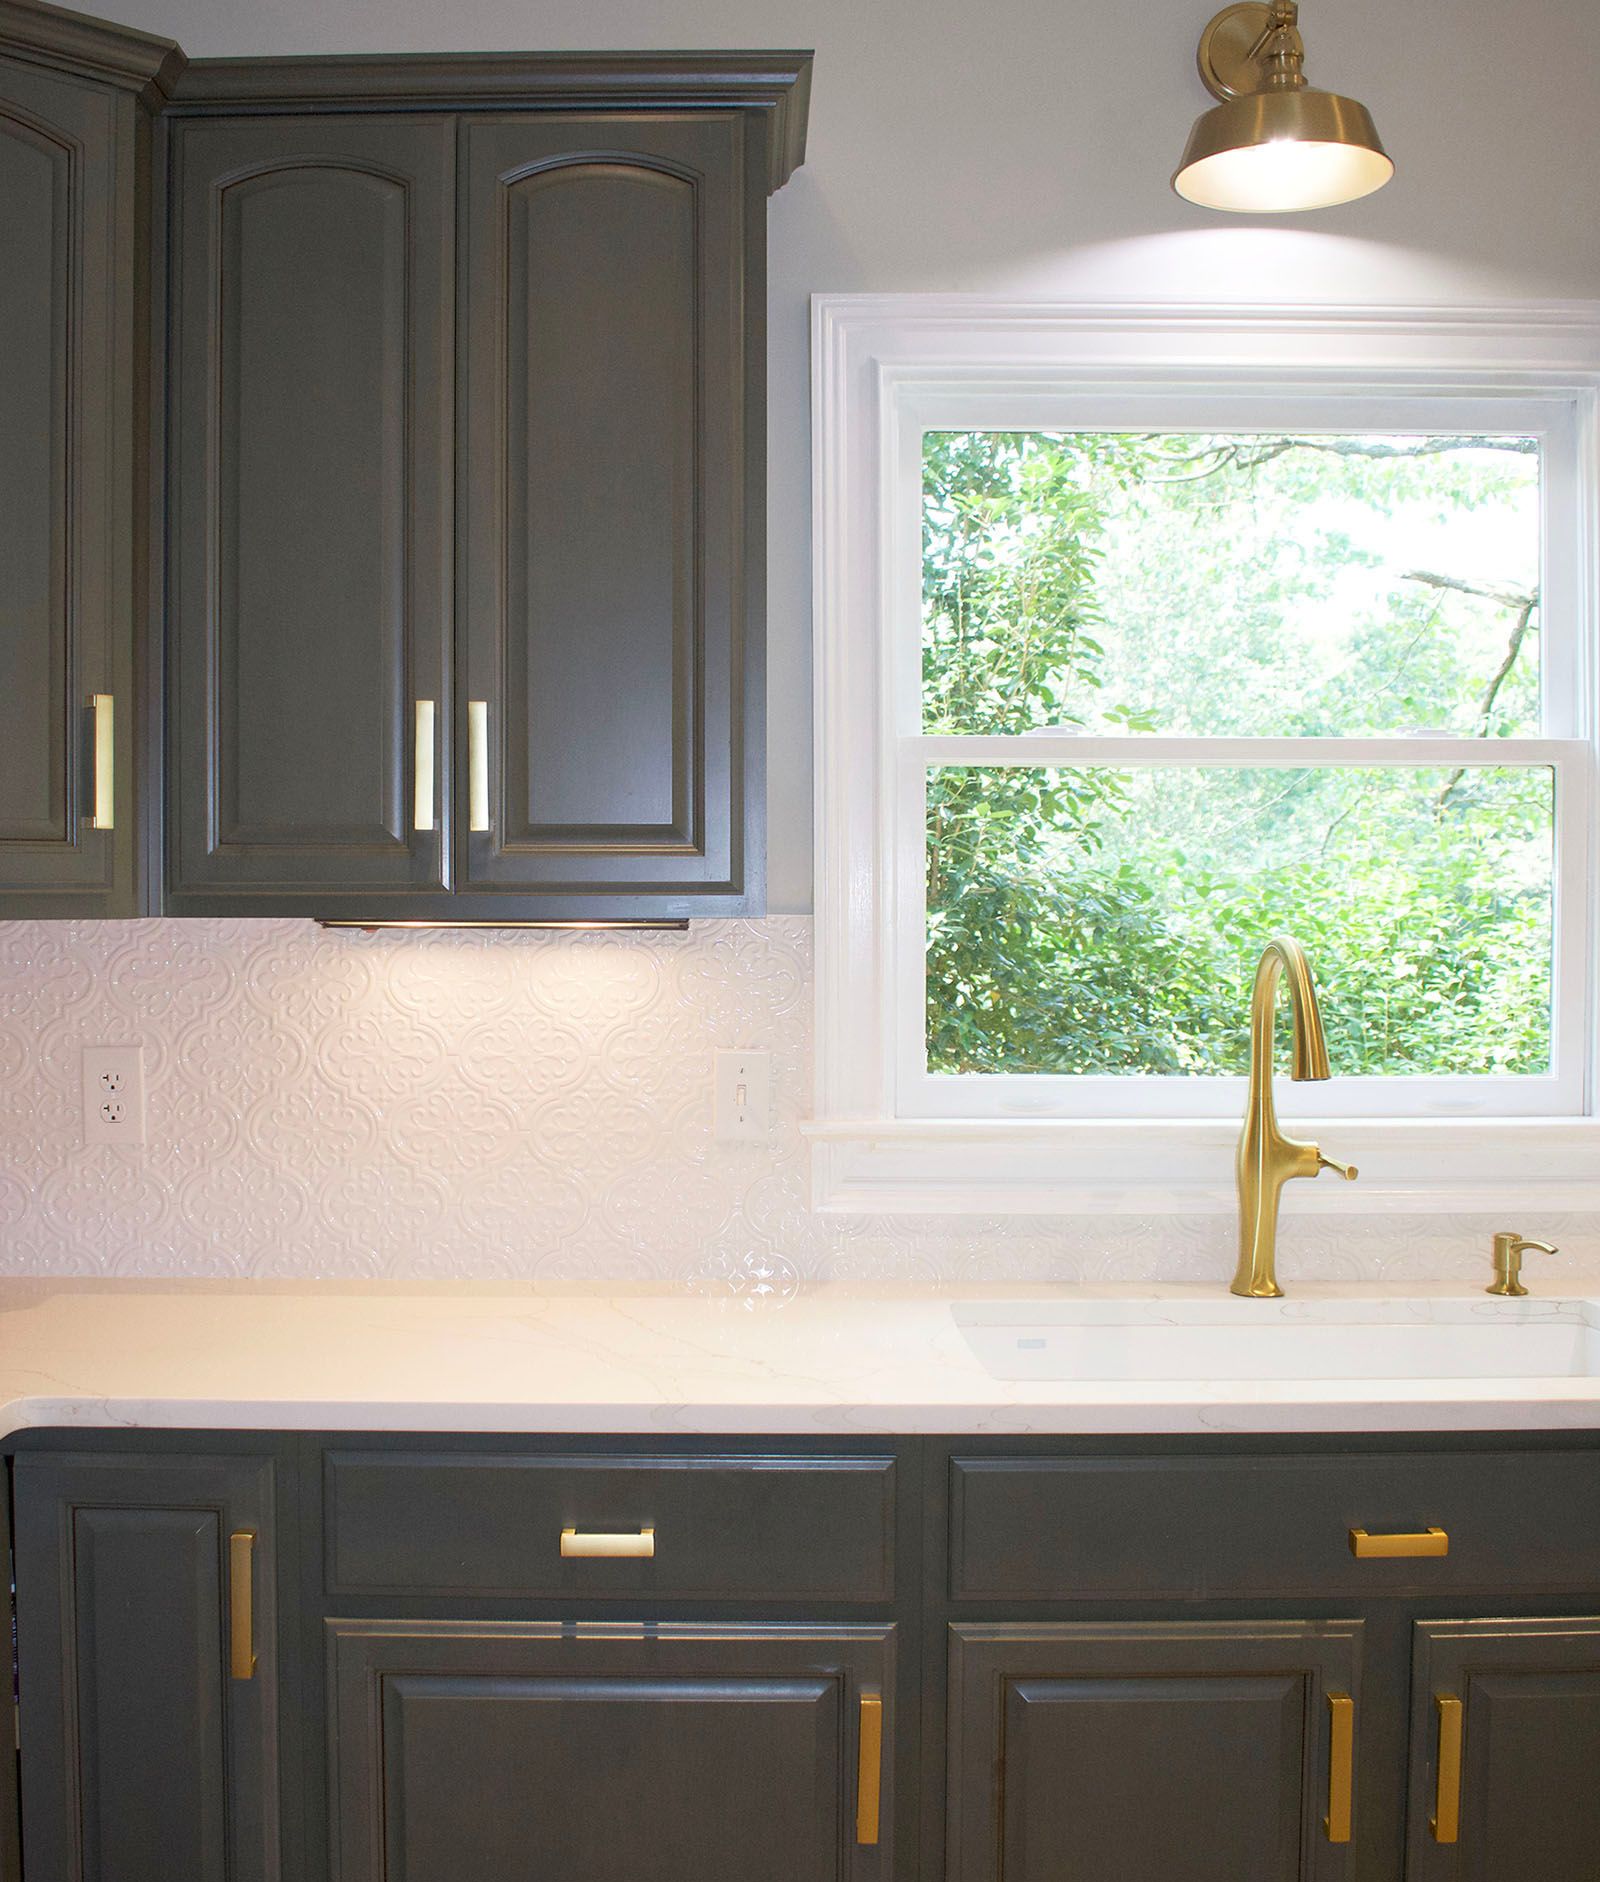 Choosing The Right Countertops And Cabinets